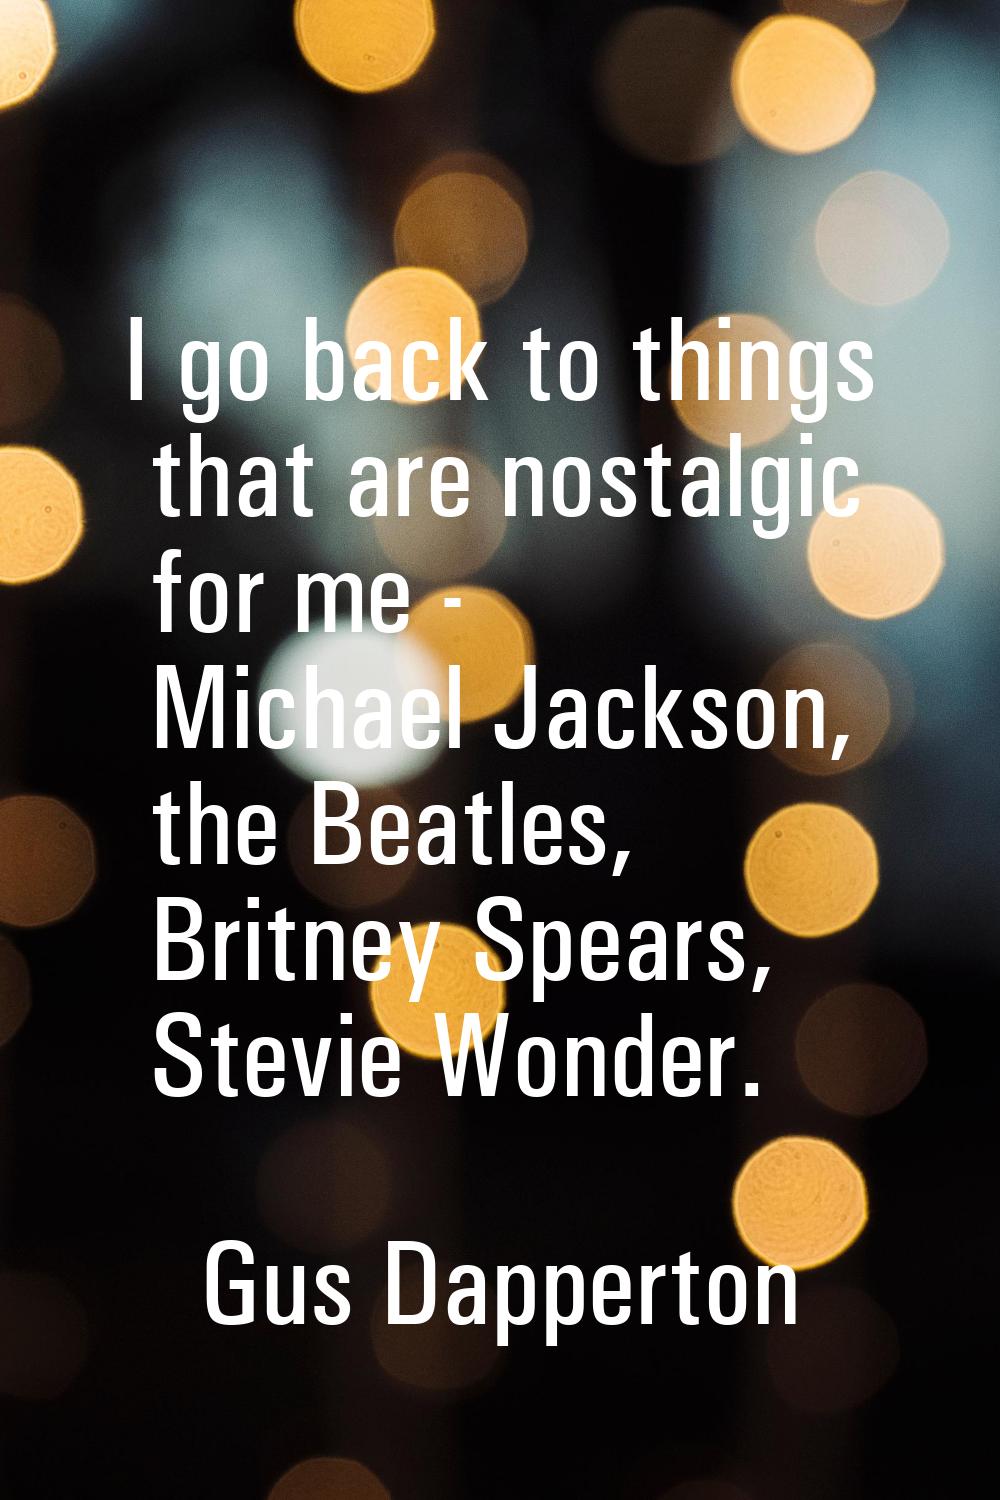 I go back to things that are nostalgic for me - Michael Jackson, the Beatles, Britney Spears, Stevi